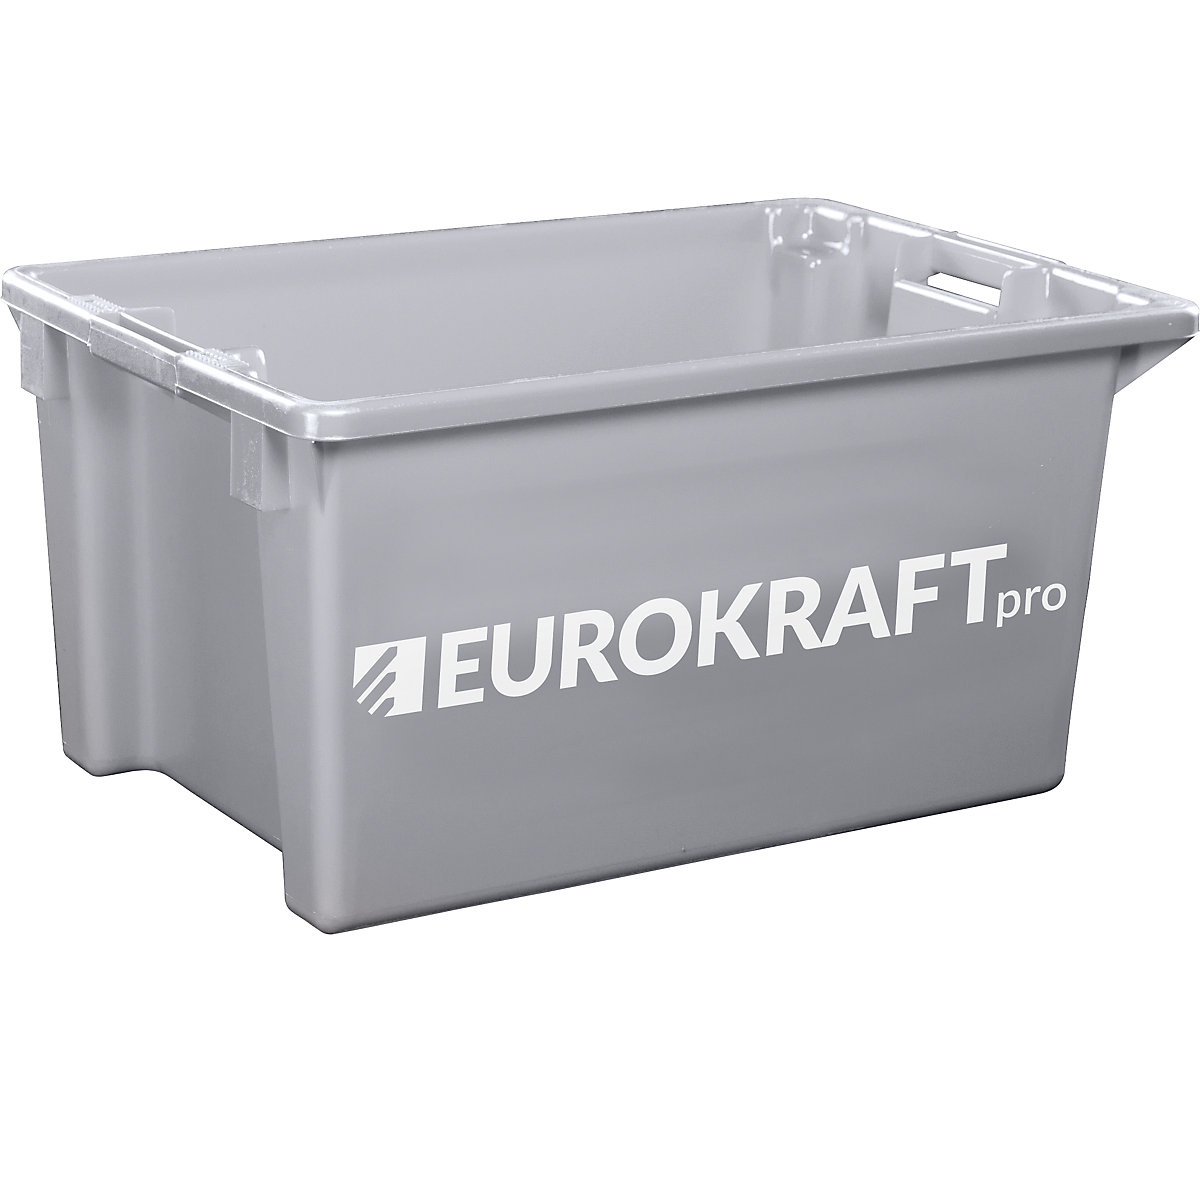 Stack/nest container made of polypropylene suitable for foodstuffs – eurokraft pro, capacity 70 l, pack of 2, solid walls and base, grey